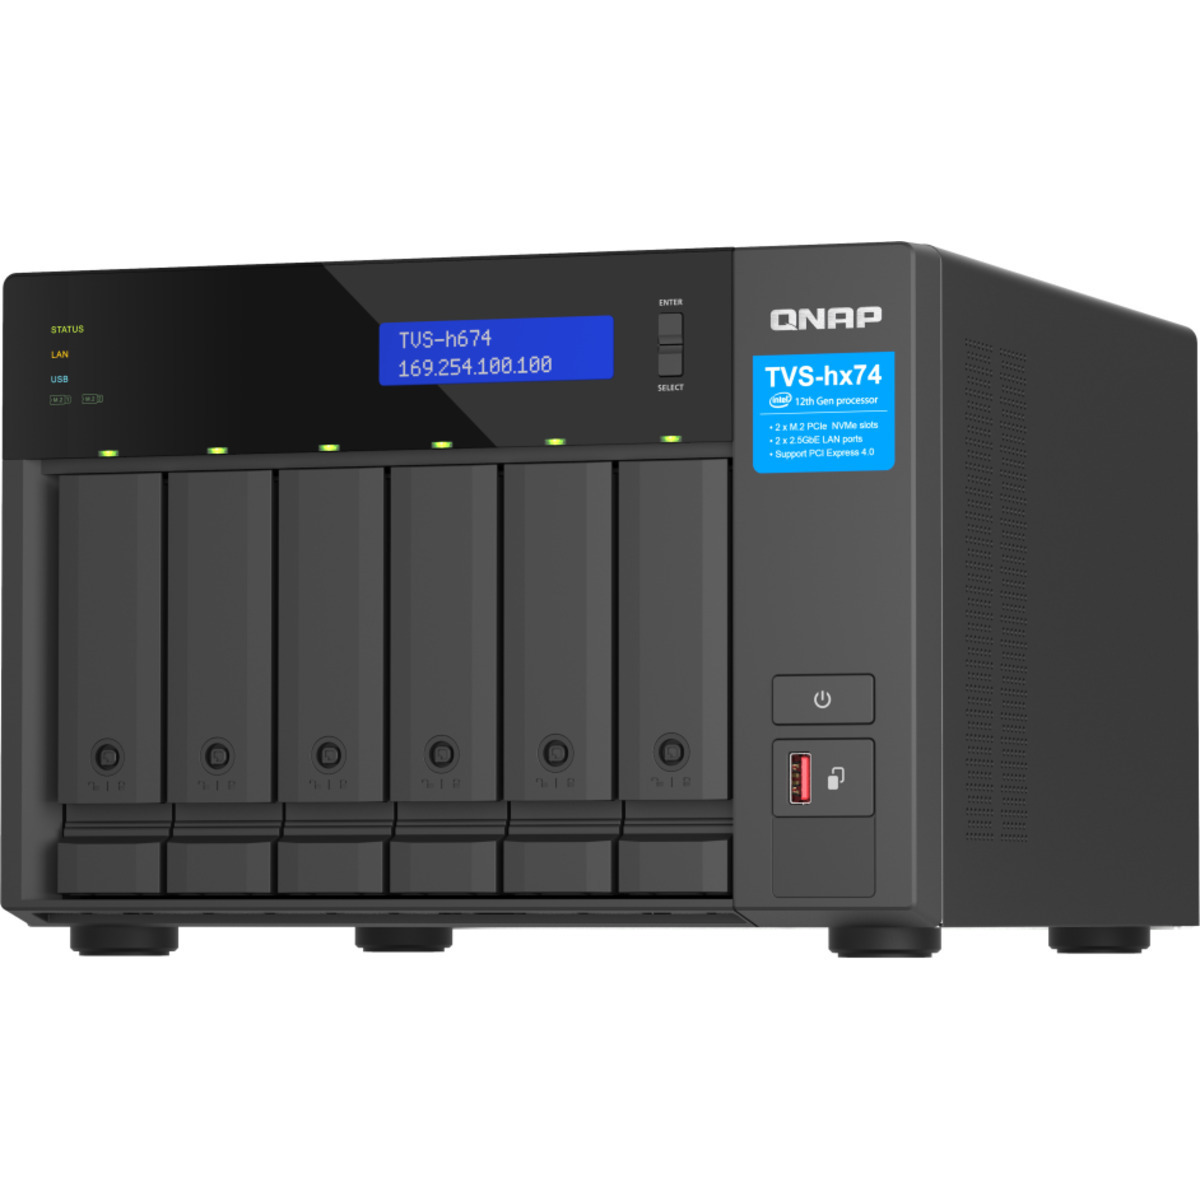 buy $4720 QNAP TVS-h674 Core i5 120tb Desktop NAS - Network Attached Storage Device 6x20000gb Seagate EXOS X20 ST20000NM007D 3.5 7200rpm SATA 6Gb/s HDD ENTERPRISE Class Drives Installed - Burn-In Tested - nas headquarters buy network attached storage server device das new raid-5 free shipping simply usa TVS-h674 Core i5